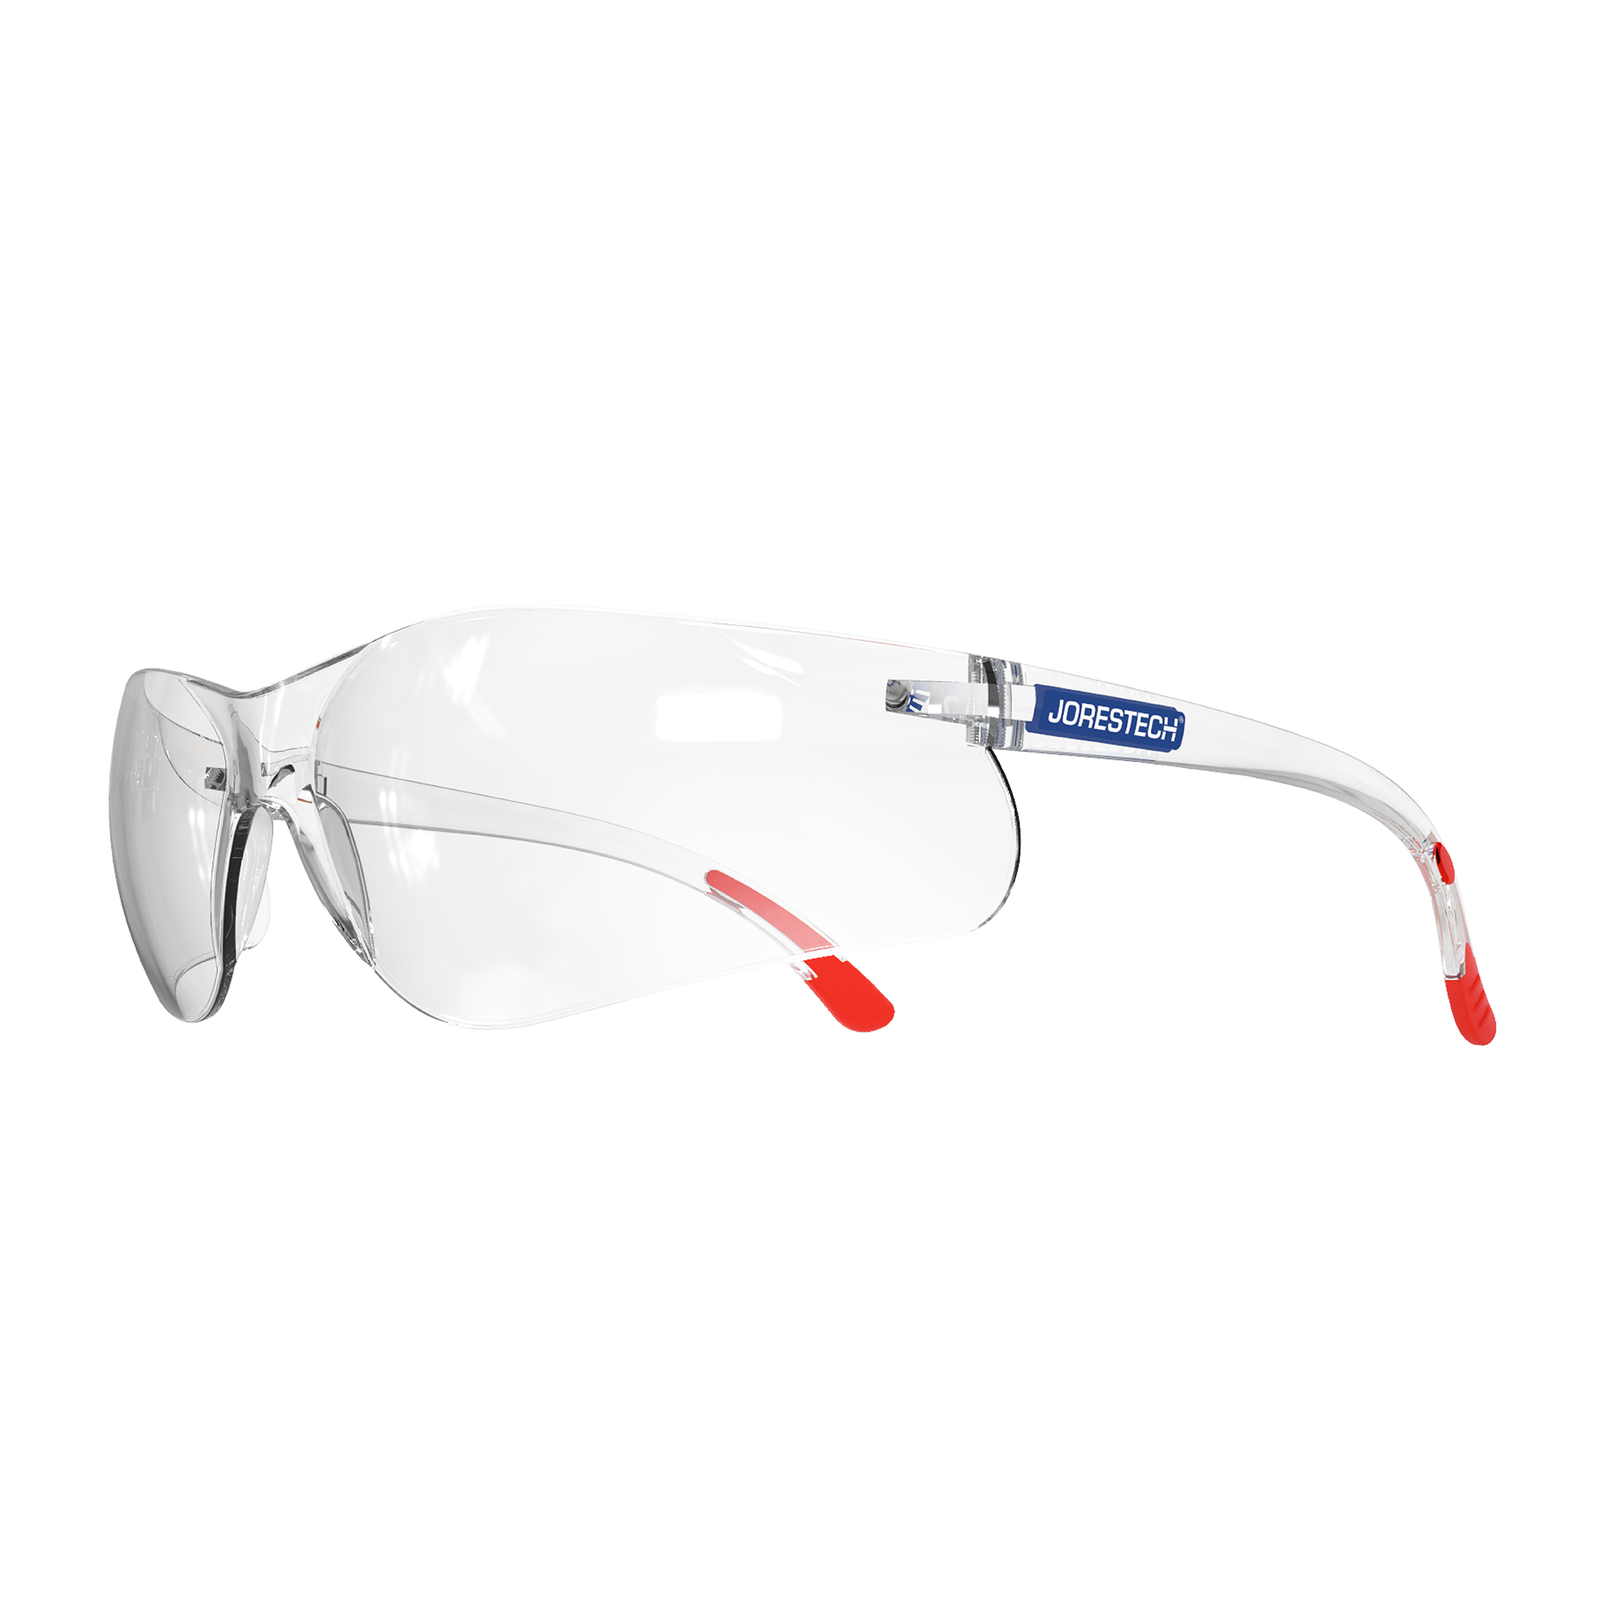 Diagonal view of the clear JORESTECH wraparound polyurethane safety glasses for high impact protection with red rubberized temple tips. 